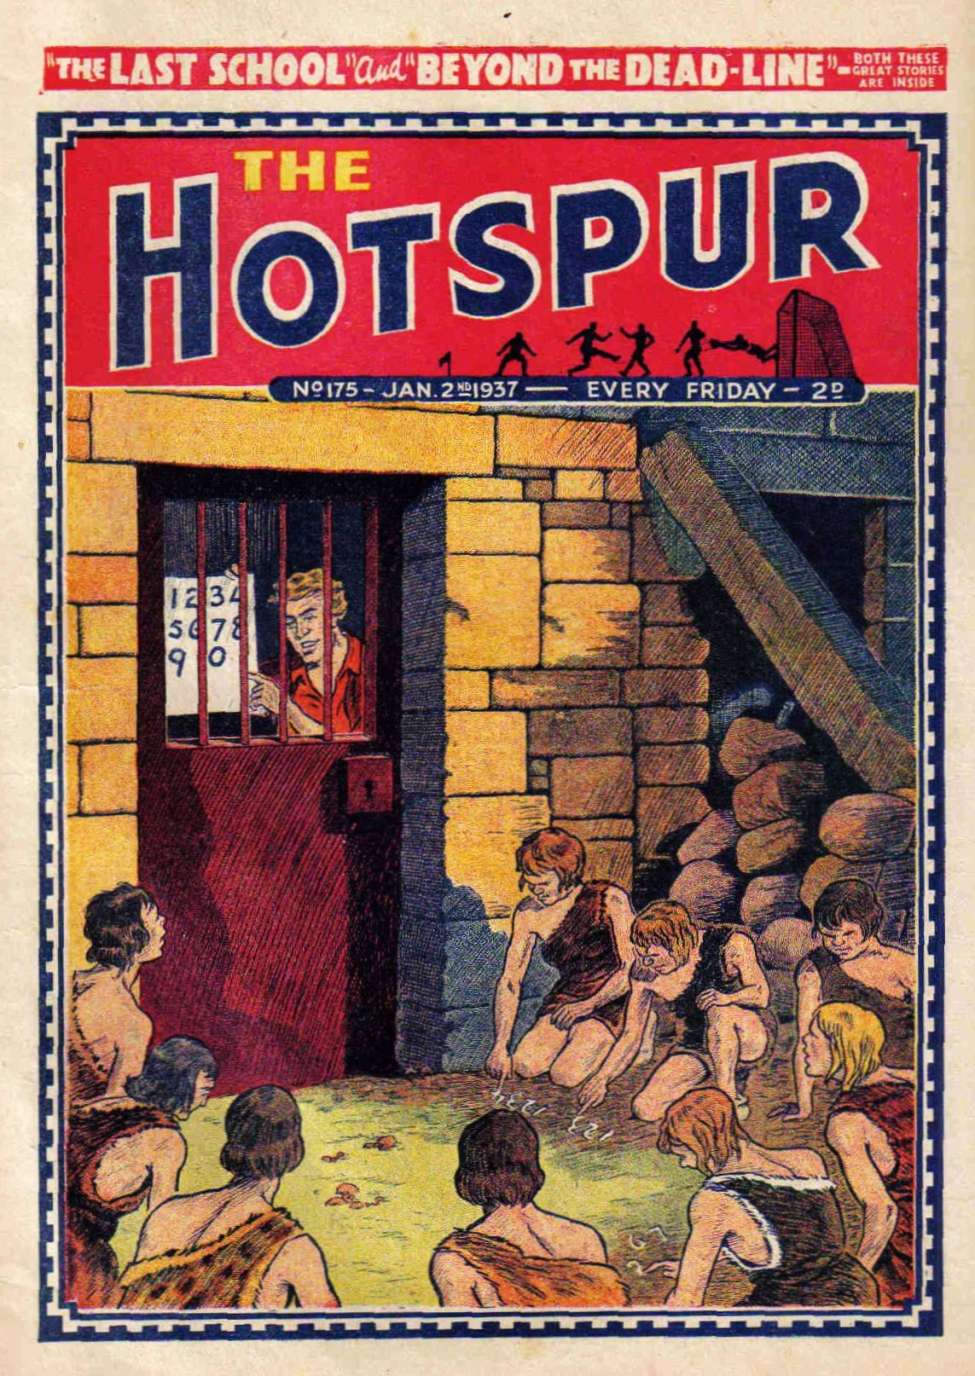 Book Cover For The Hotspur 175